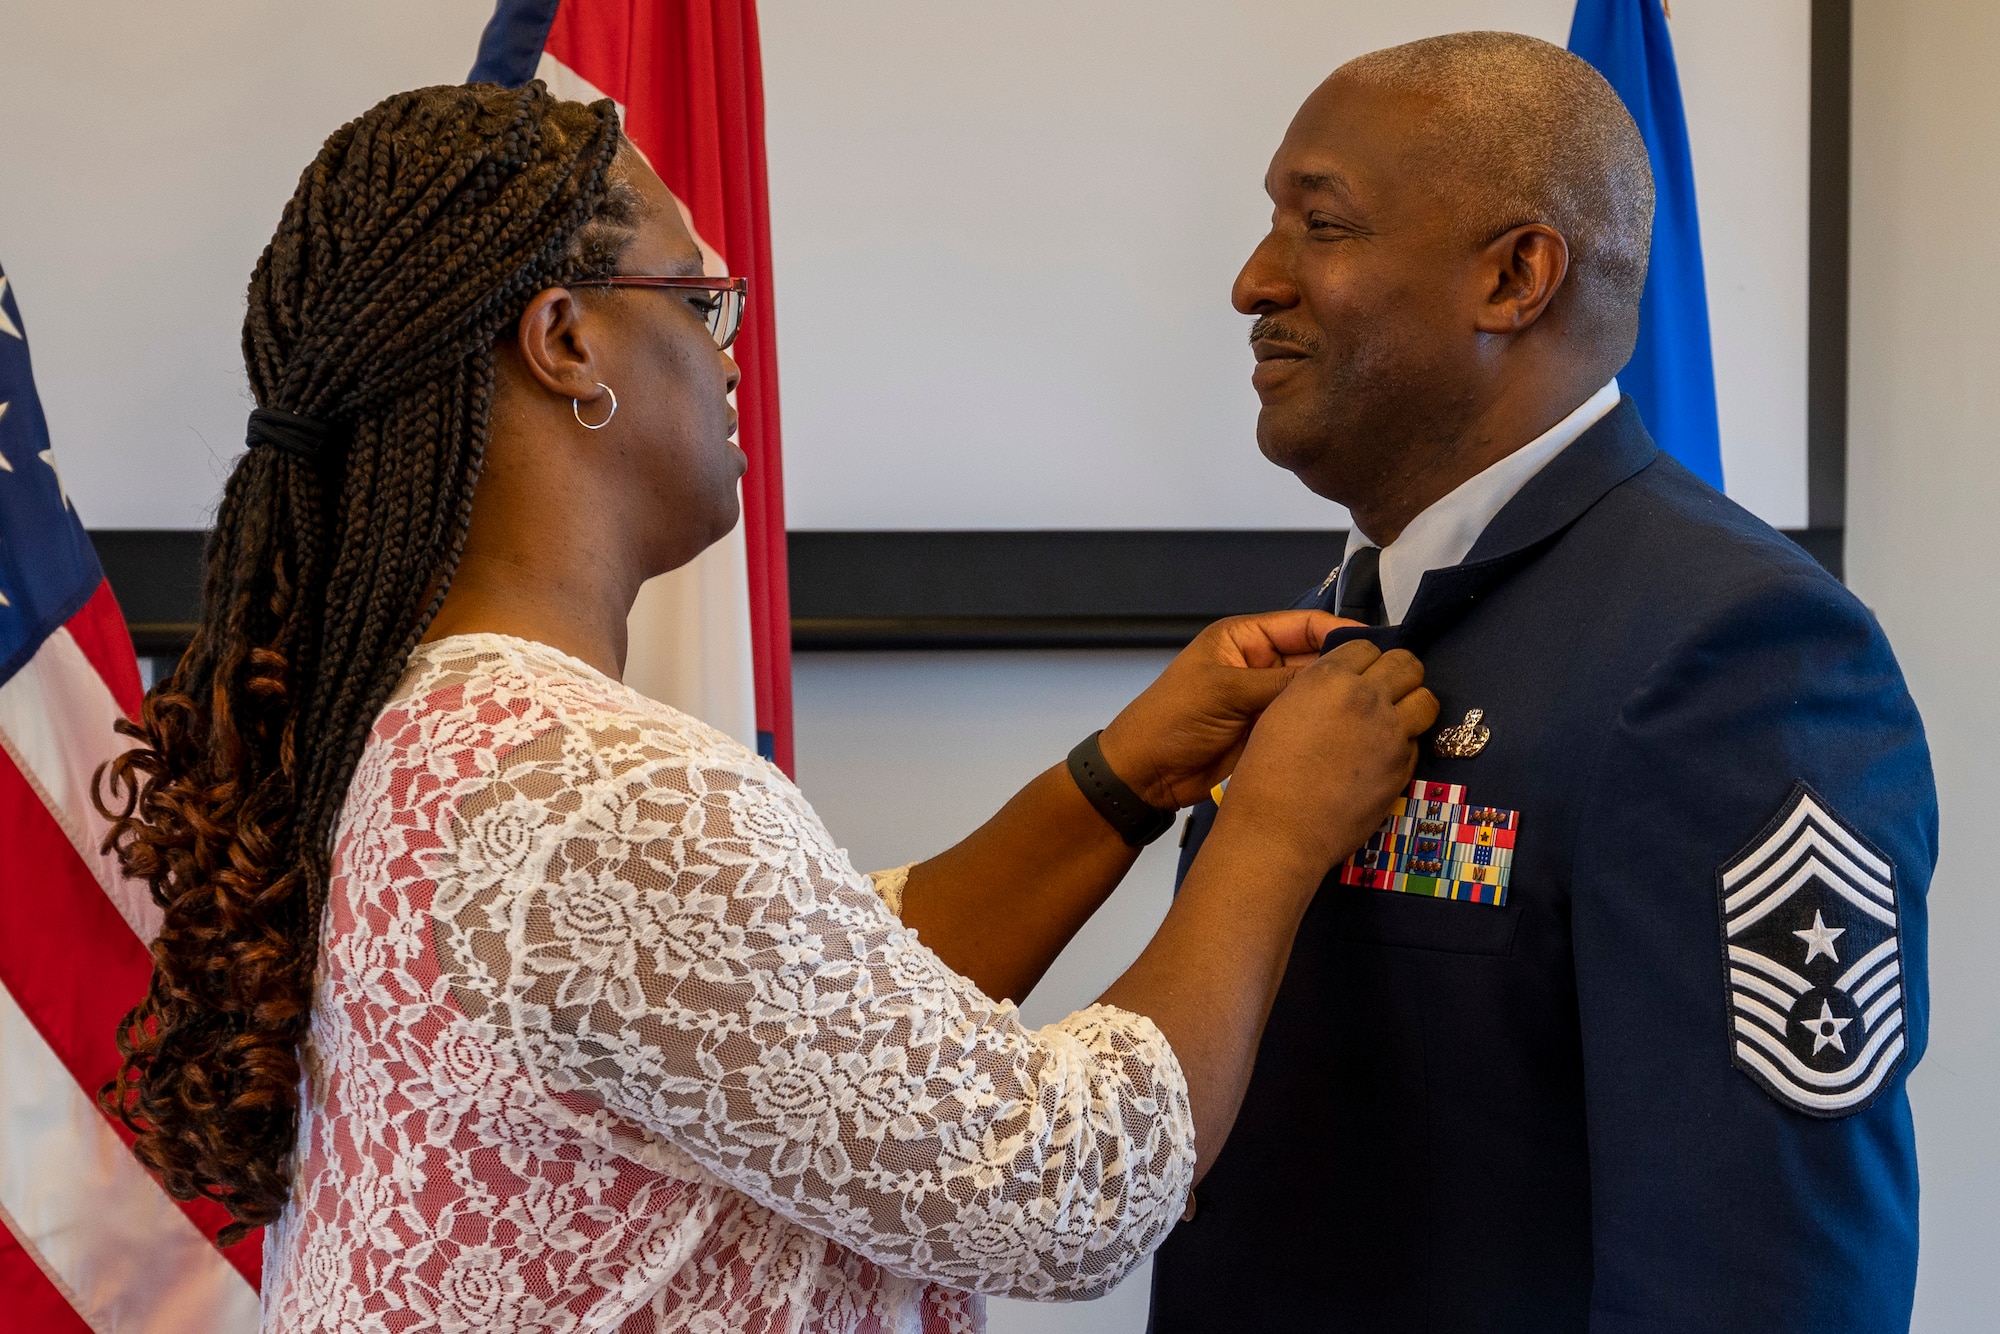 Chief Master Sgt. LeRoy E. McCardell Jr., 131st Bomb Wing command chief master sergeant, is pinned by his wife during his retirement ceremony, June 25, 2022, at Jefferson Barracks Air National Guard Base, St. Louis, Missouri. McCardell served for 34 years. (U.S. Air National Guard photo by Senior Airman Whitney Erhart)